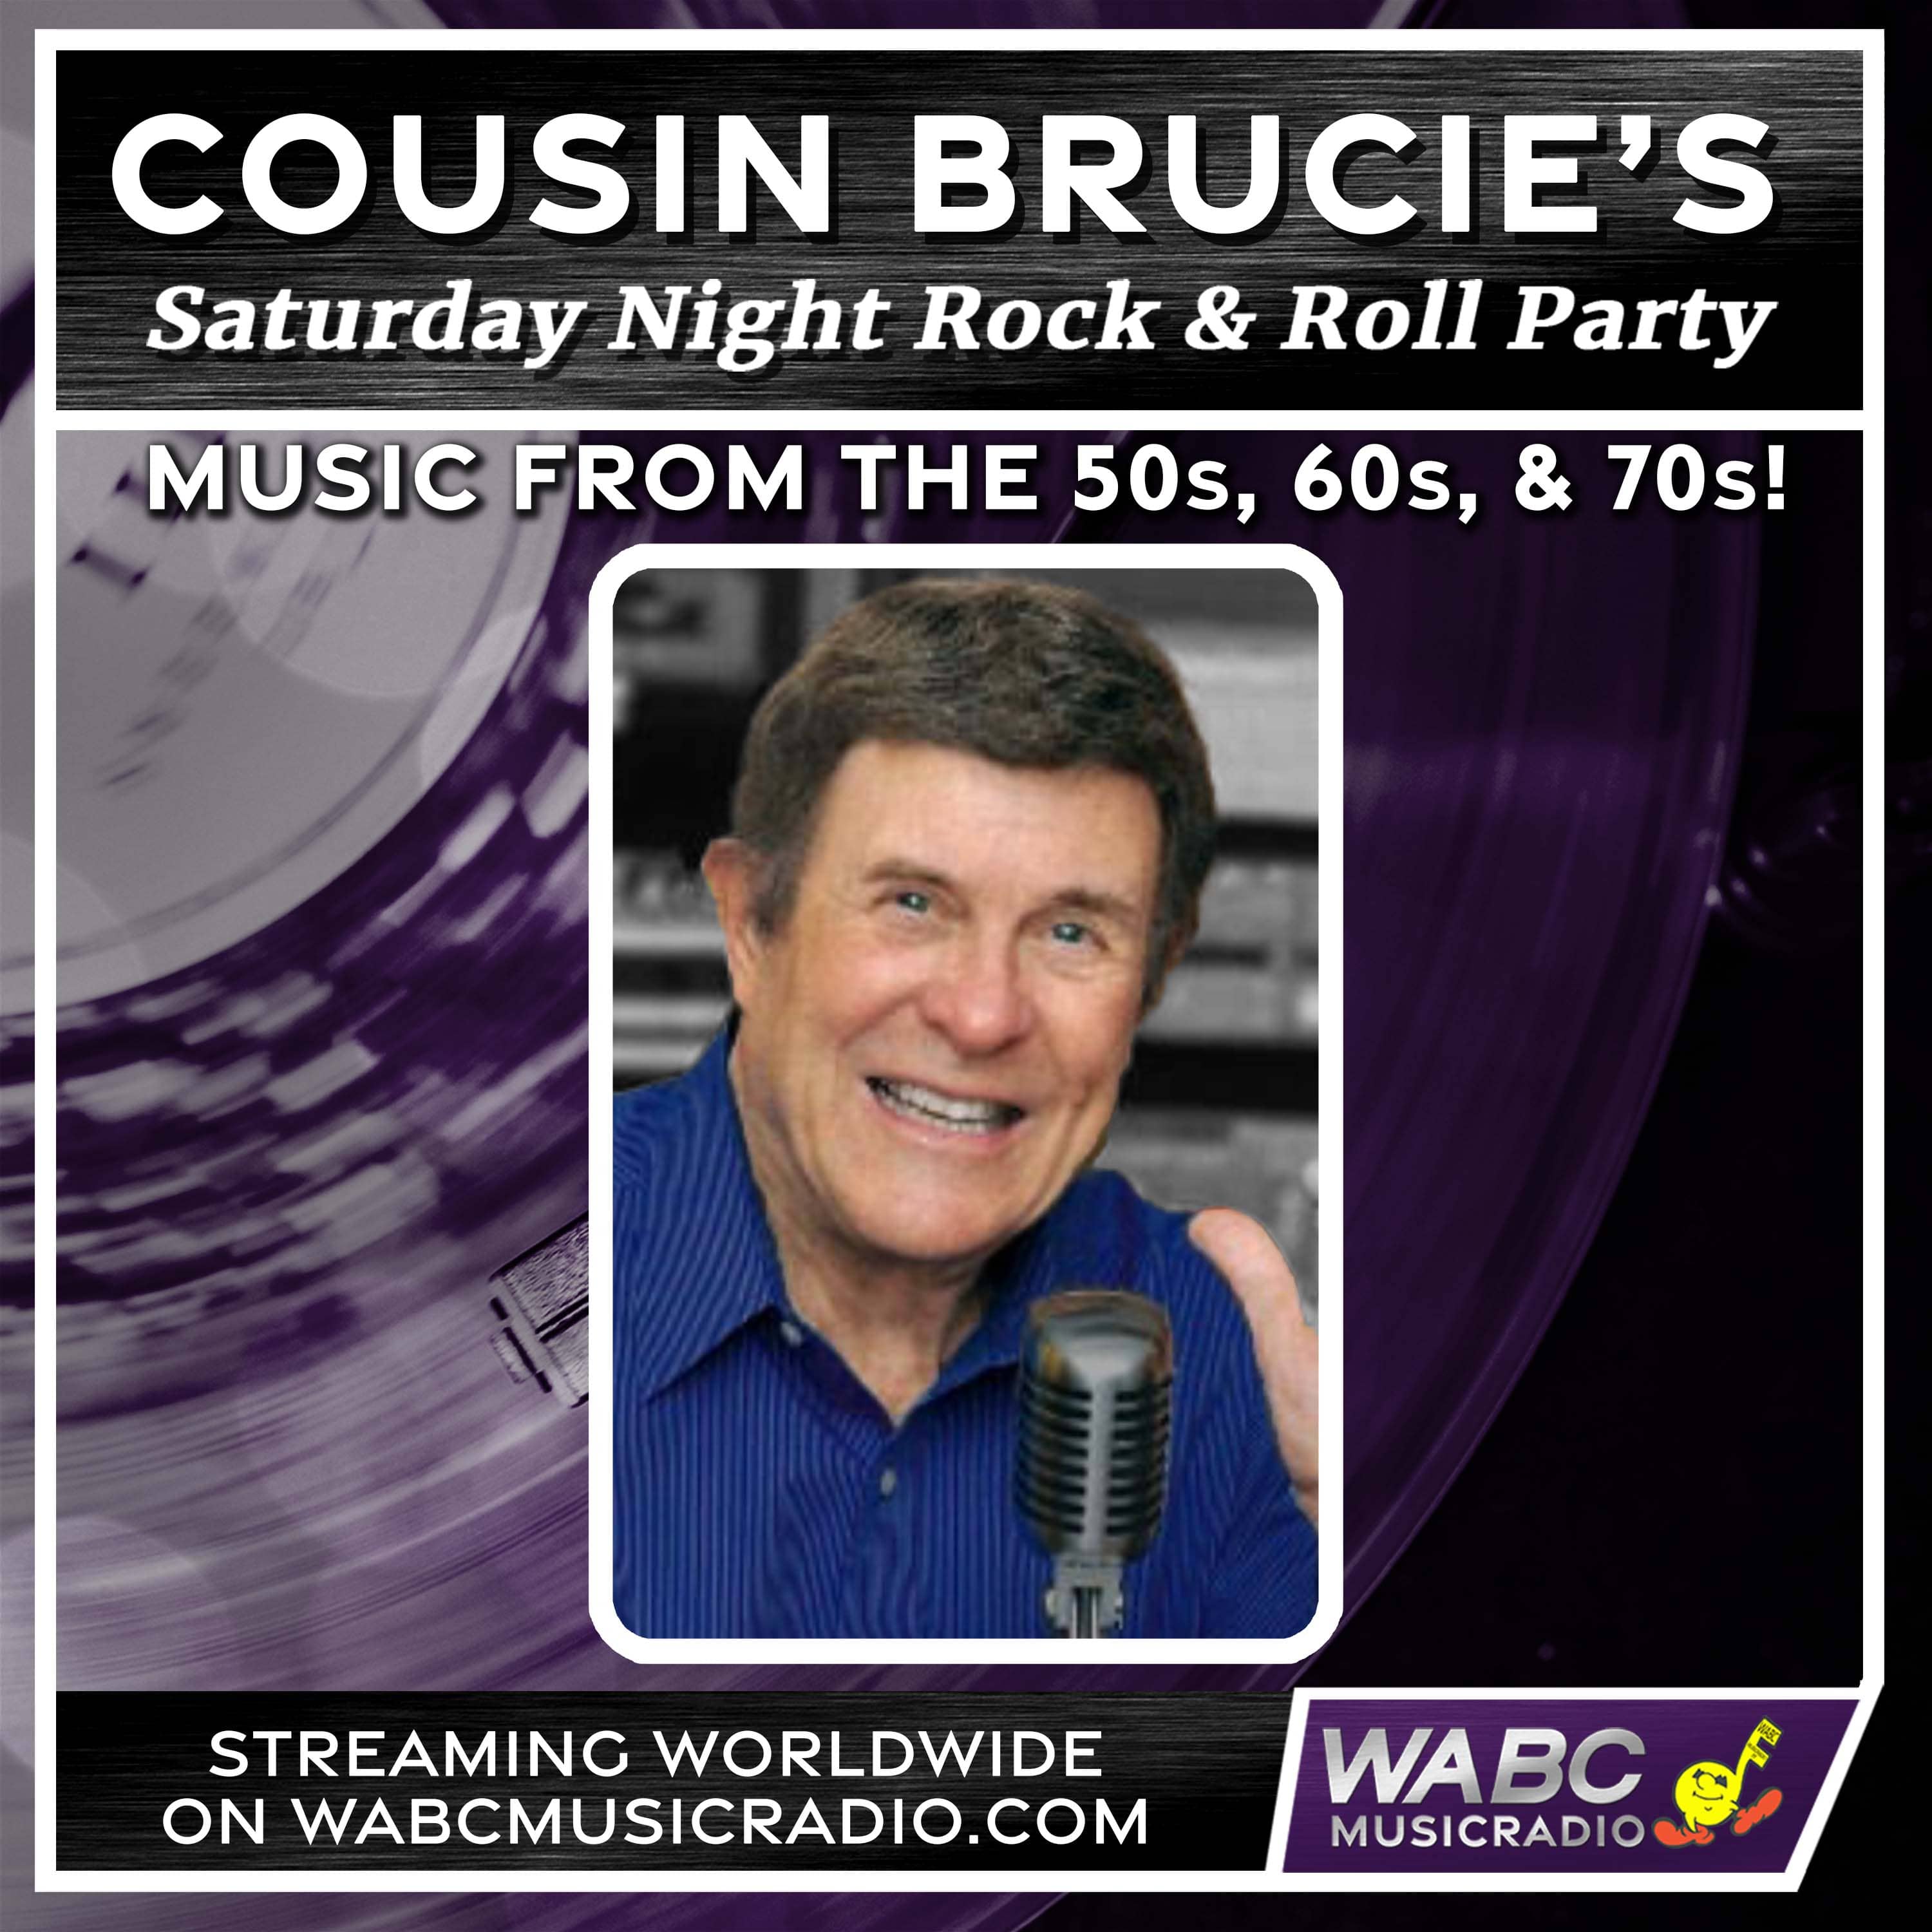 Cousin Brucie’s Saturday Night Rock & Roll Party